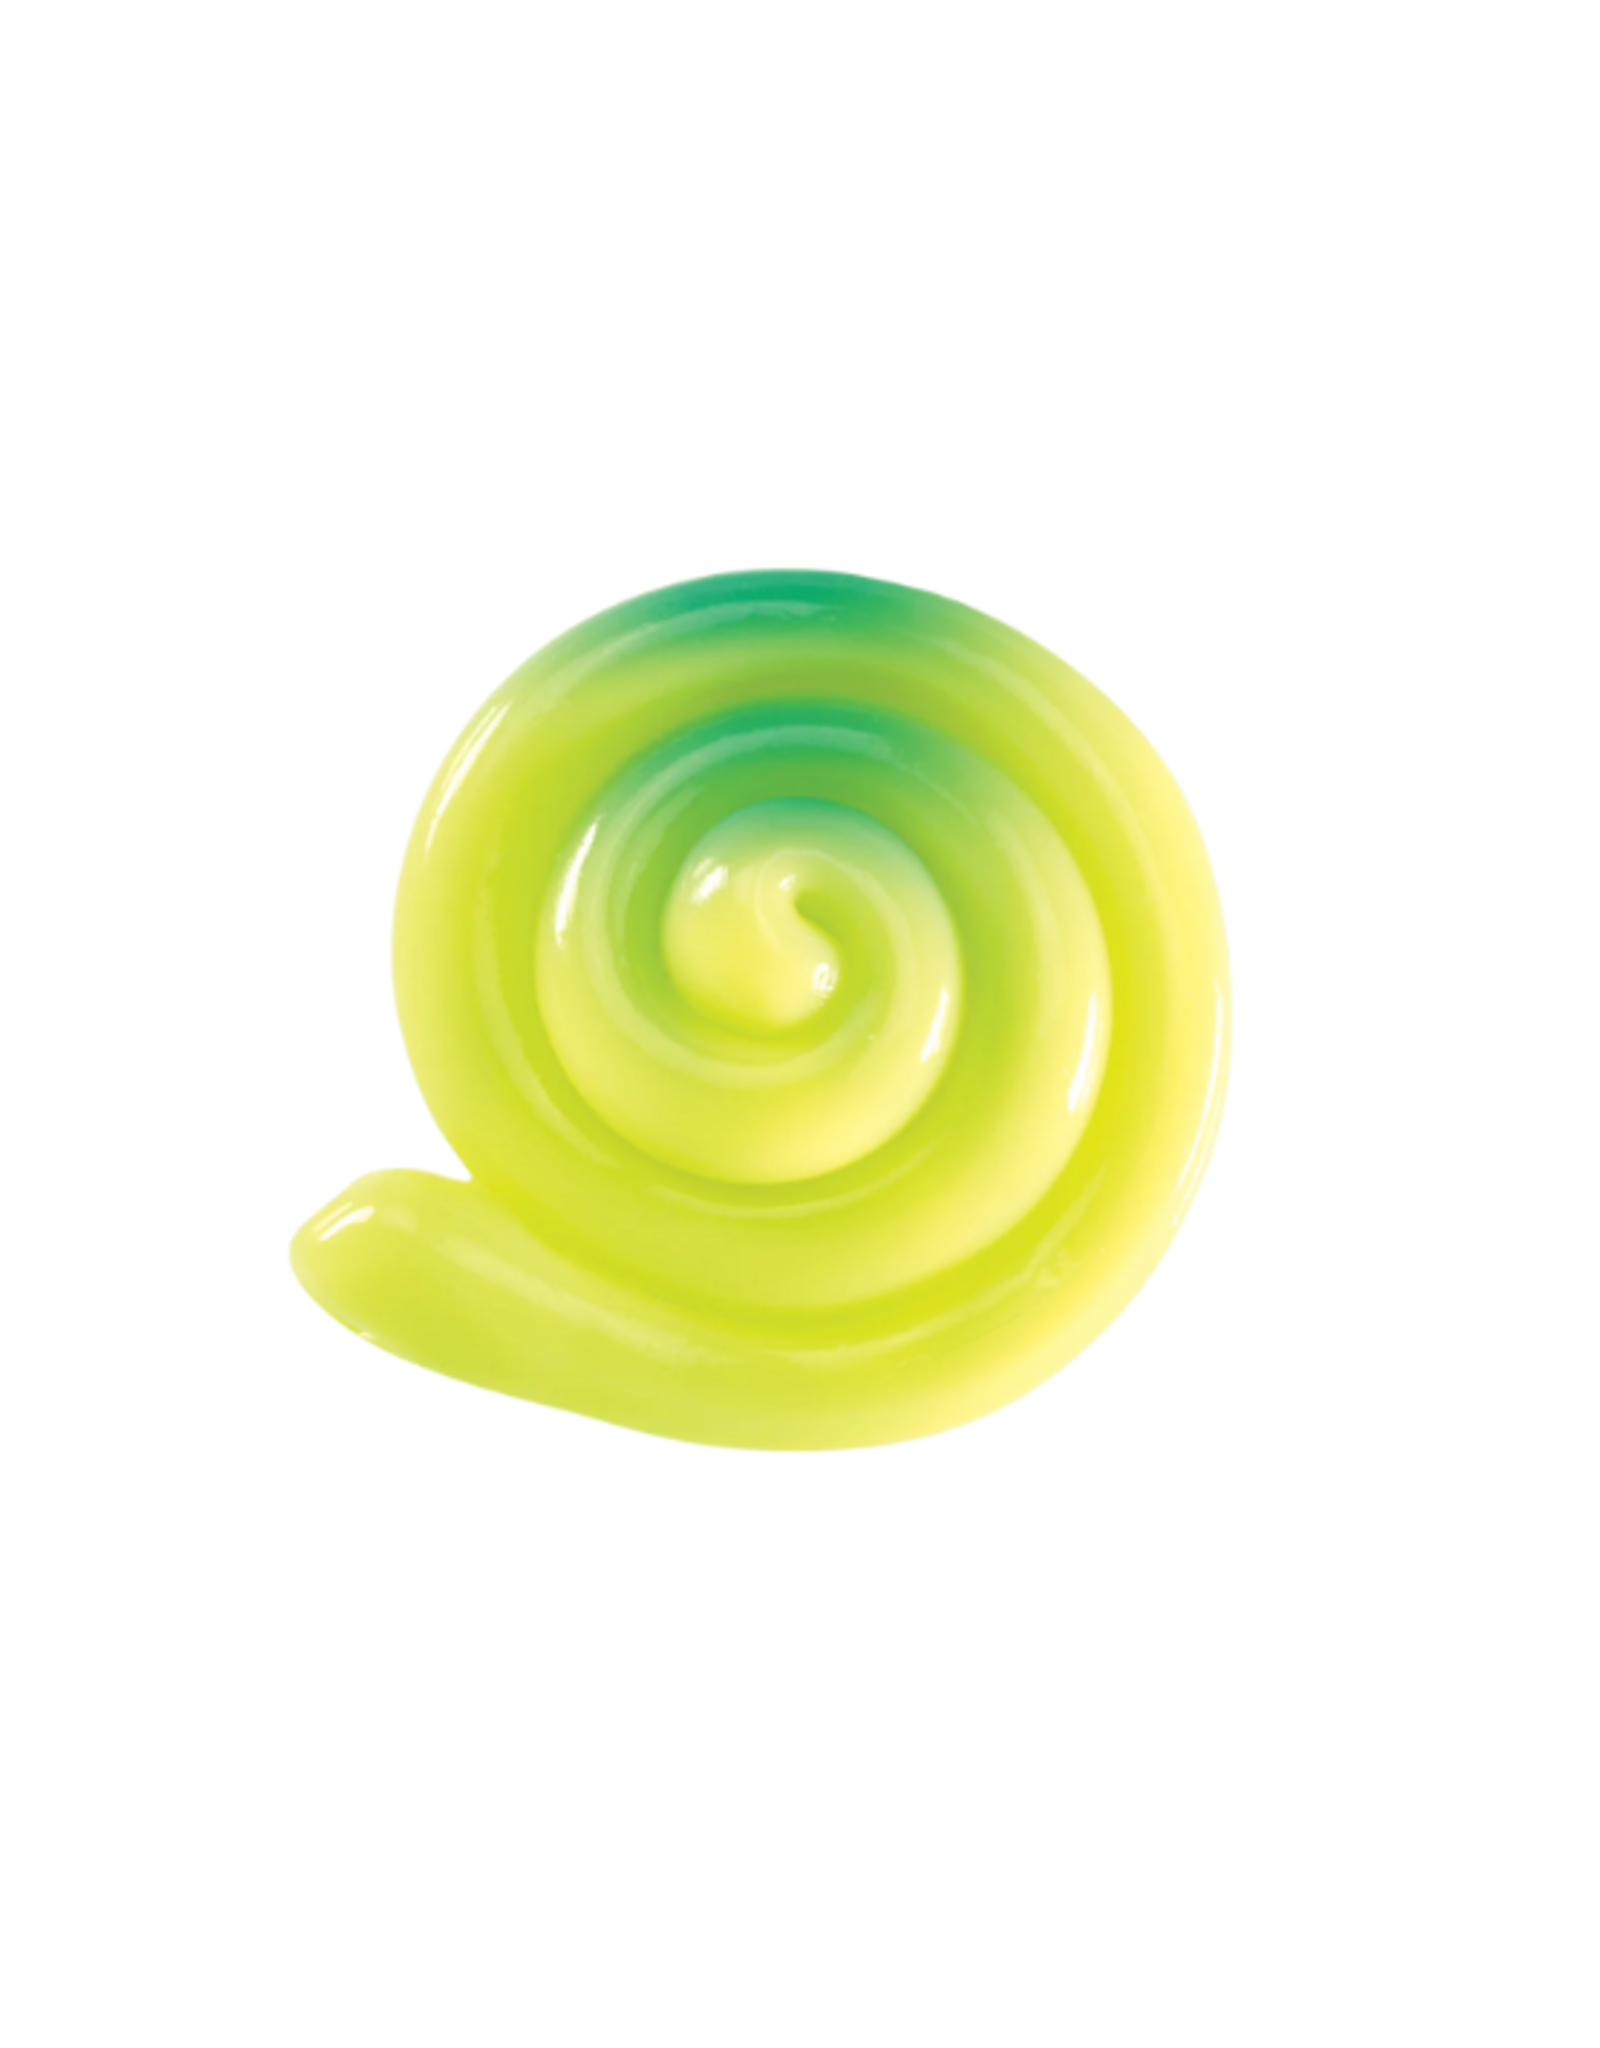 Crazy Aarons Crazy Aarons Thinking Putty - 0.47oz - Spring Frog